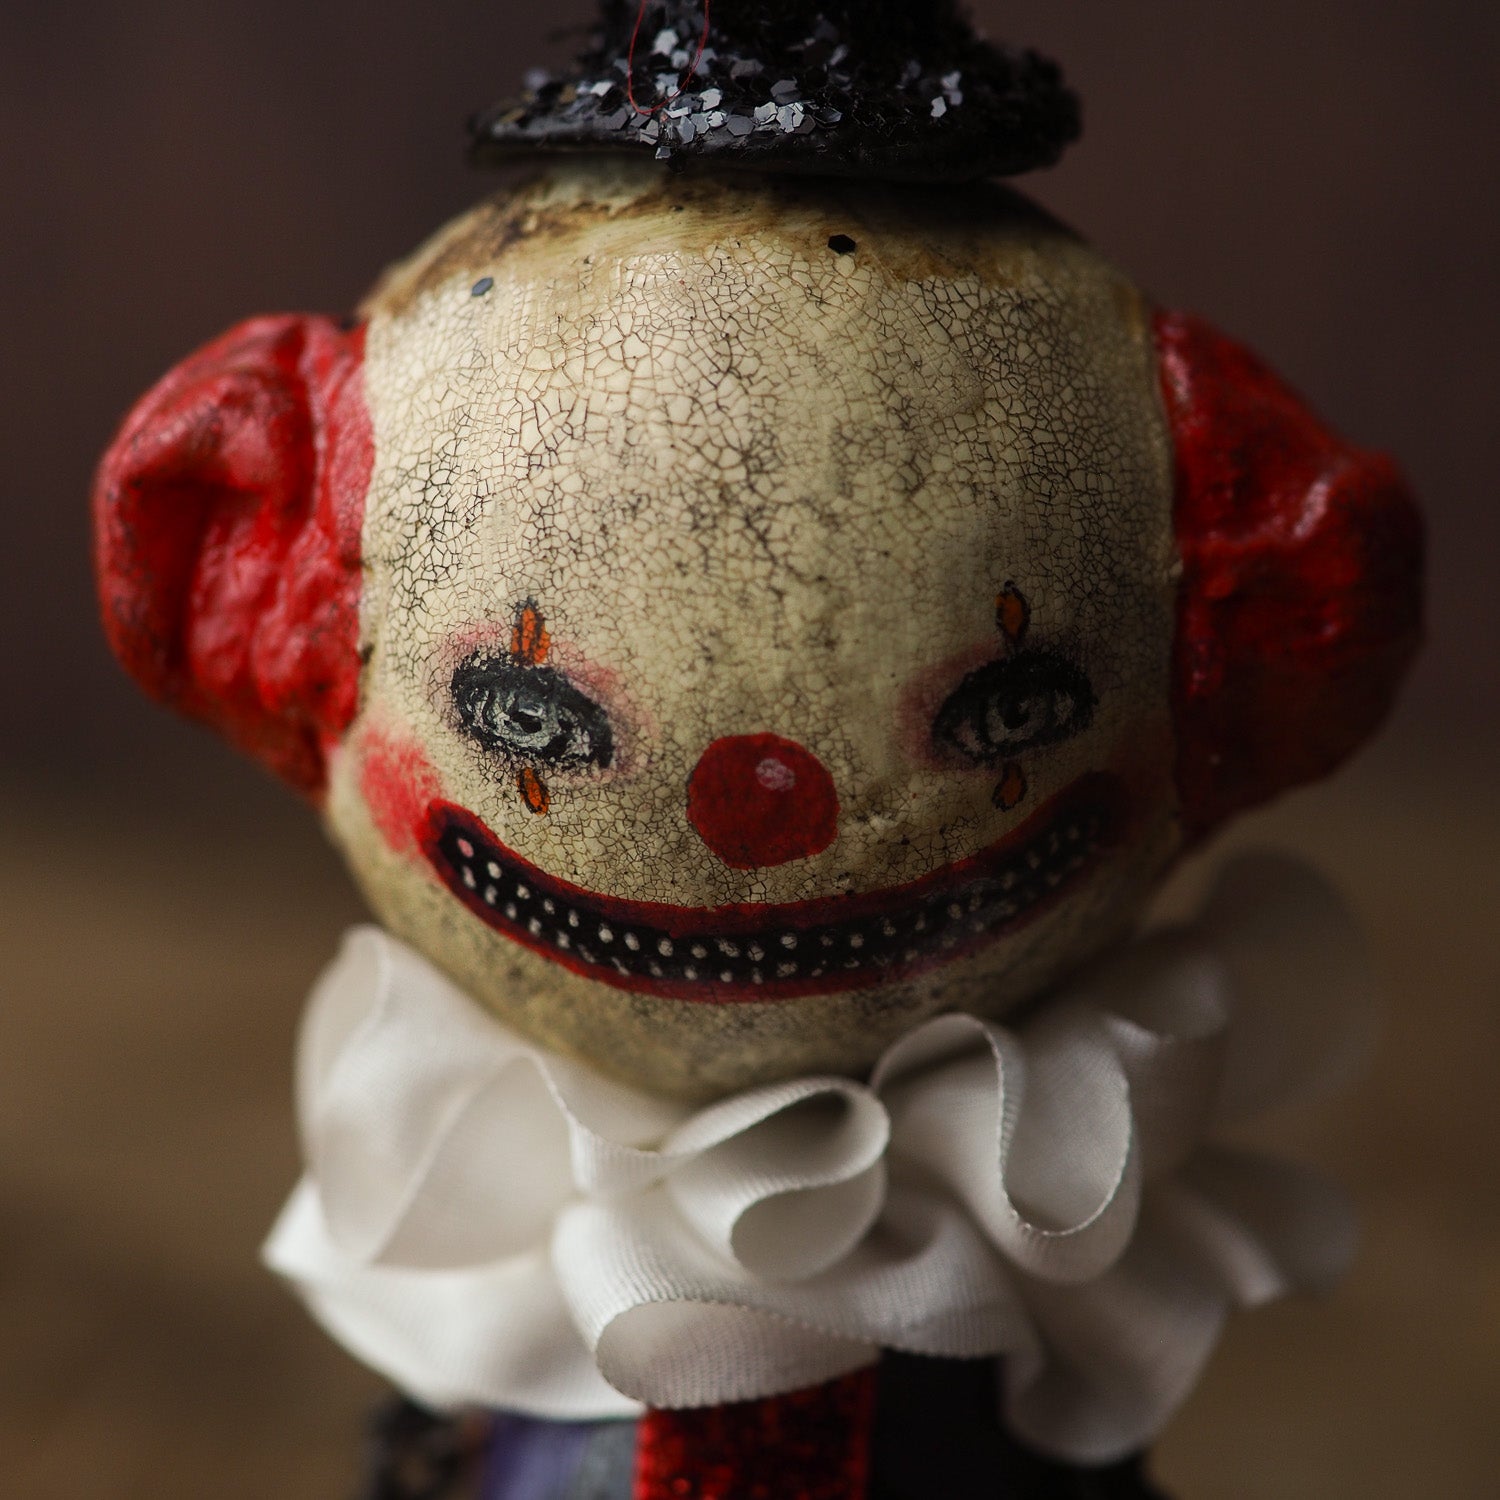 Original Halloween art doll original creation by Danita Art. Paper Clay, sculpted and painted in a spooky whimsical unique work of art. Clown IT Pennywise Evil.